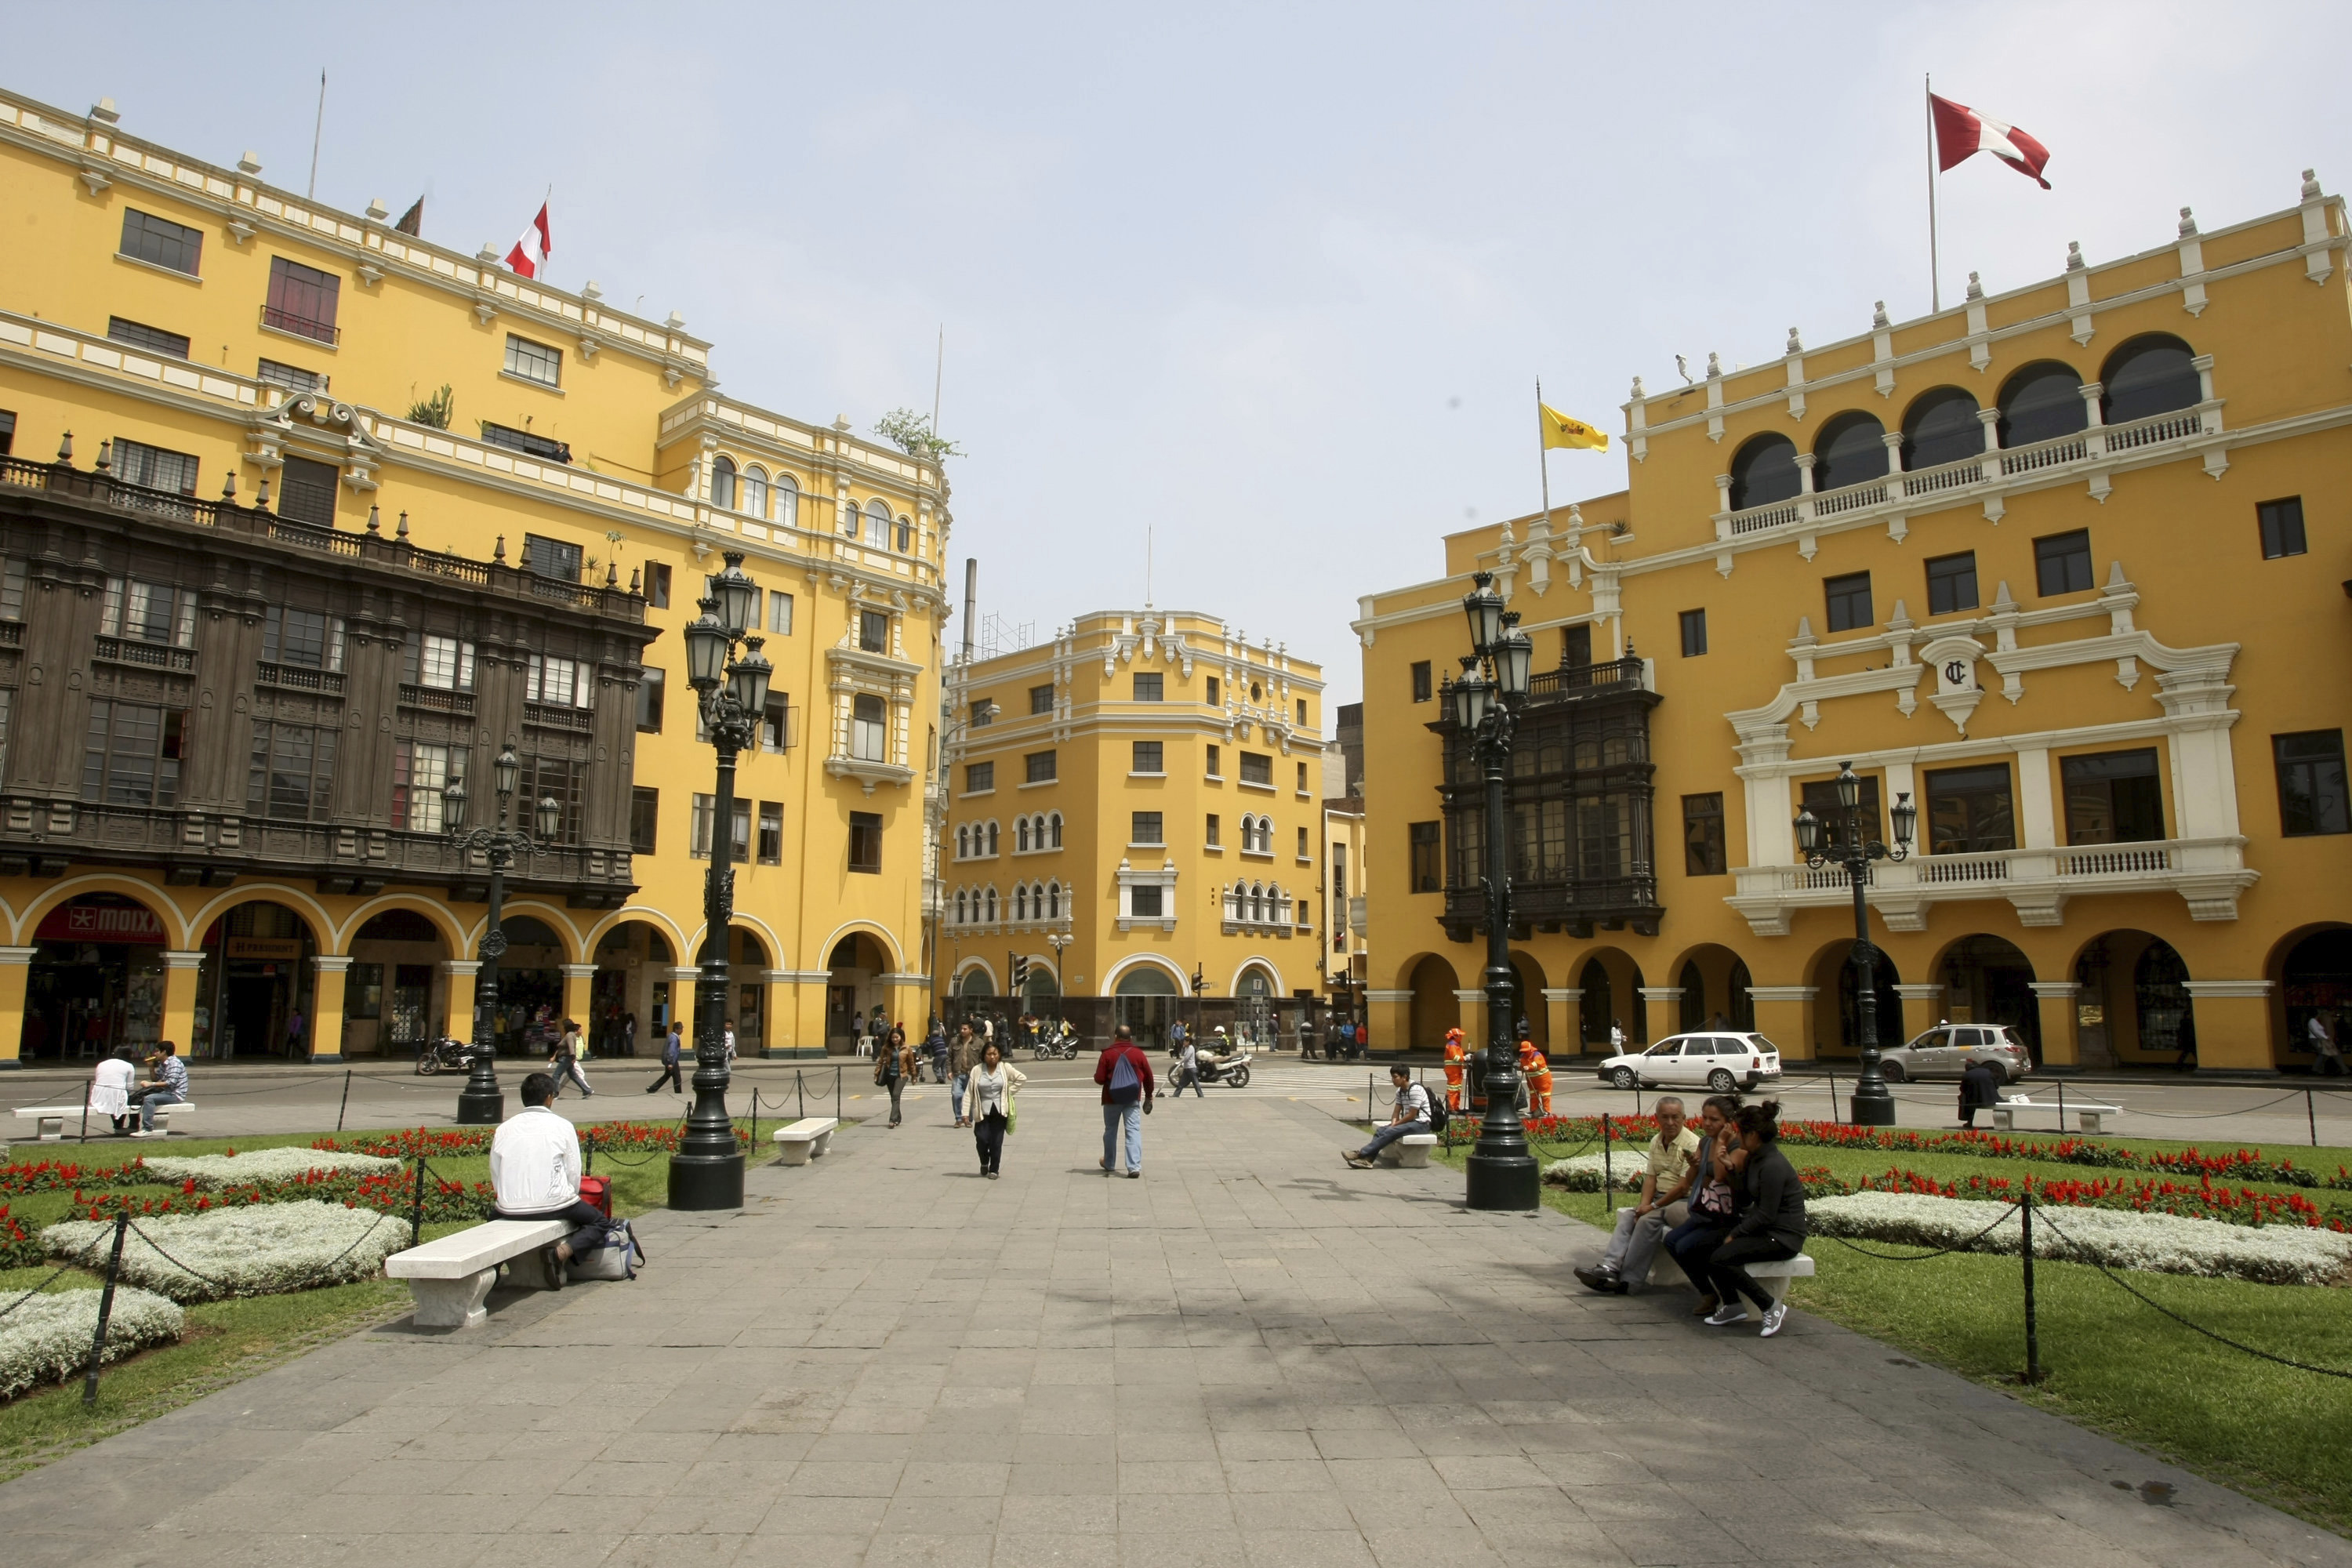 General view of the Plaza Mayor in Lima on September 11, 2013 in Lima, Peru. (Raul Sifuentes—LatinContent / Getty Images)